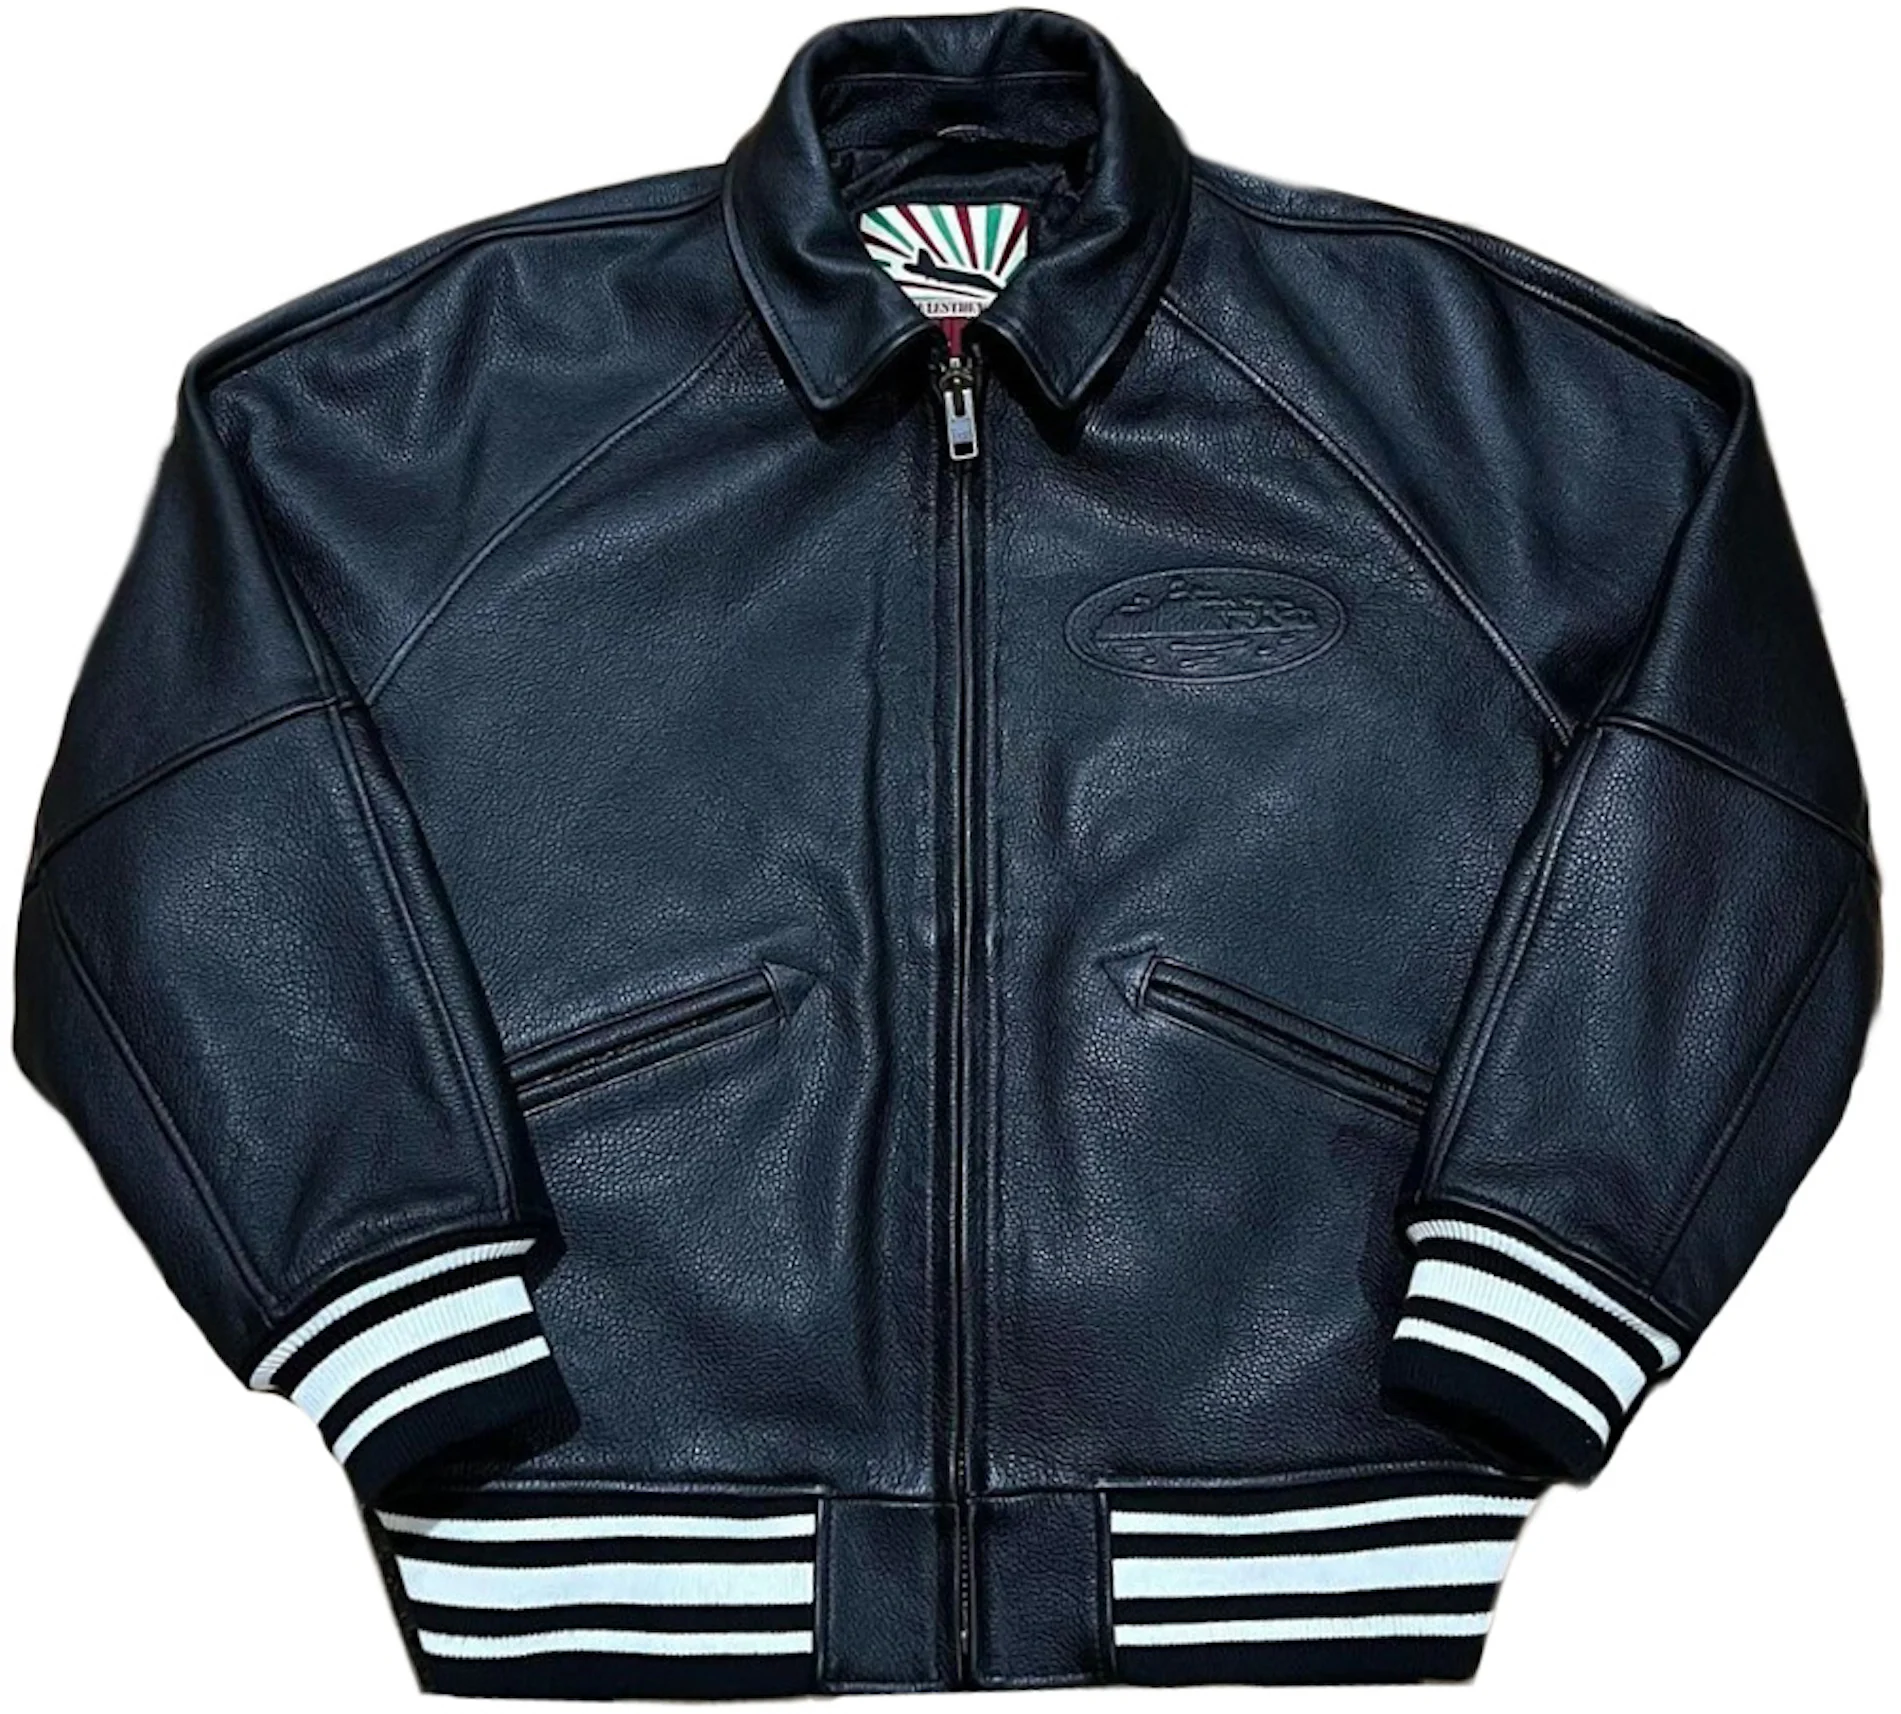 Black Camouflage Leather Jacket with the Best Price